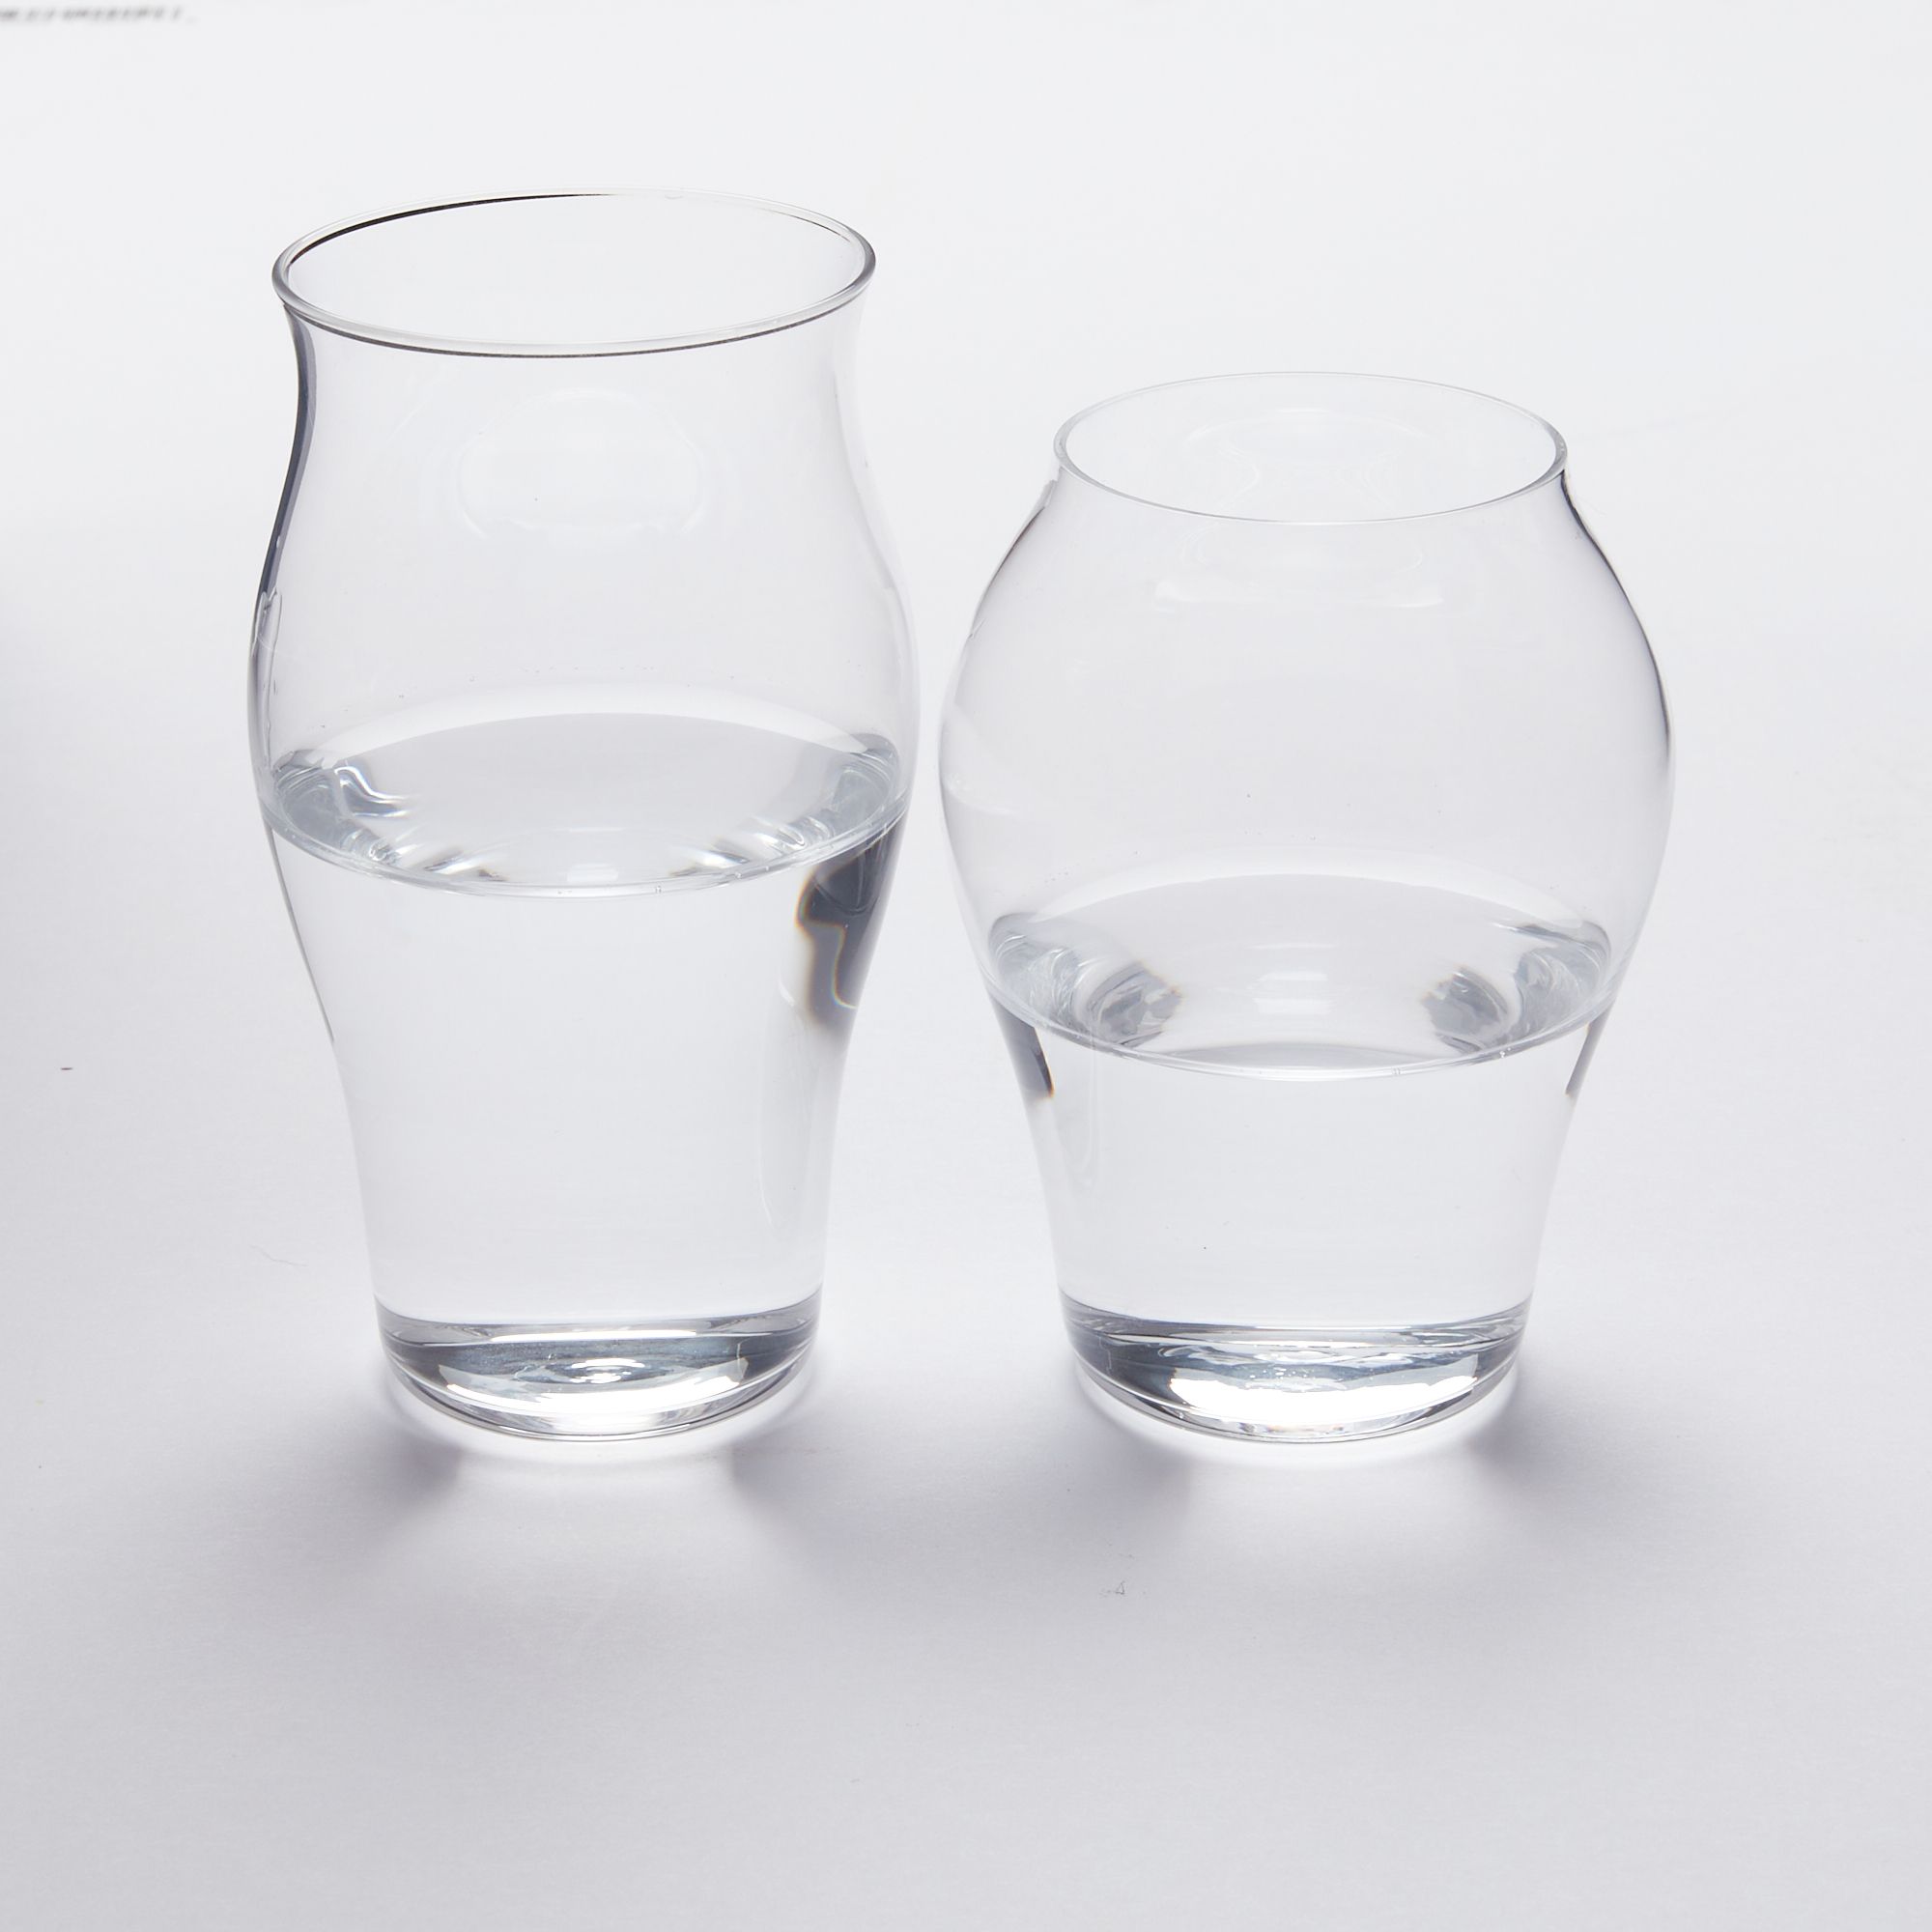 Two clear glasses filled halfway with water, one taller than the other, both with curved bodies.